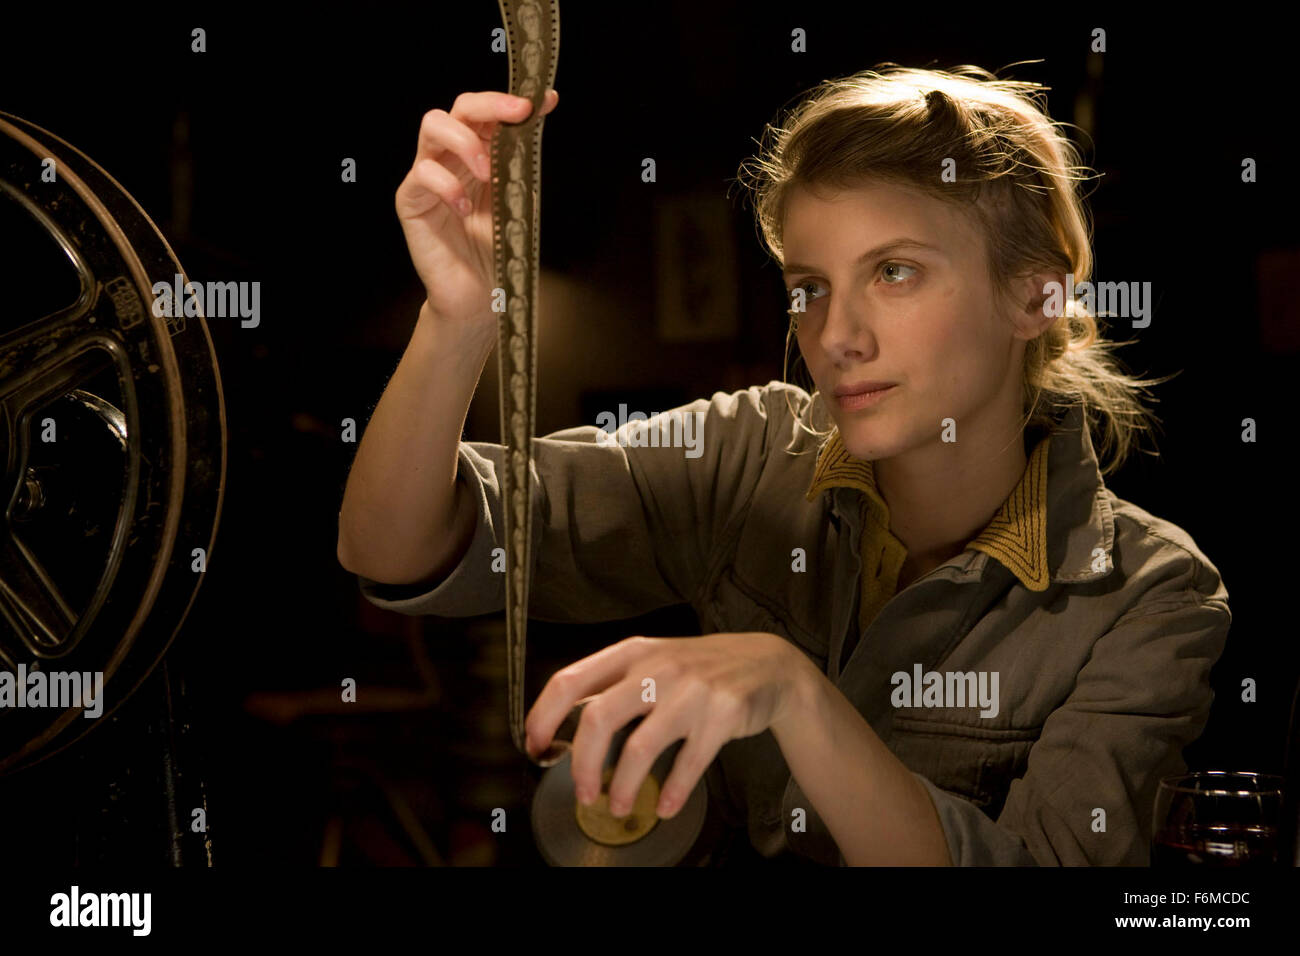 RELEASE DATE: August 21, 2009. MOVIE TITLE: Inglourious Basterds. STUDIO: Universal Pictures. PLOT: In Nazi occupied France, young Jewish refugee Shosanna Dreyfus witnesses the slaughter of her family by Colonel Hans Landa. Narrowly escaping with her life, she plots her revenge several years later when German war hero Fredrick Zoller takes a rapid interest in her and arranges an illustrious movie premiere at the theater she now runs. With the promise of every major Nazi officer in attendance, the event catches the attention of theBasterds, a group of Jewish-American guerilla soldiers led by Stock Photo